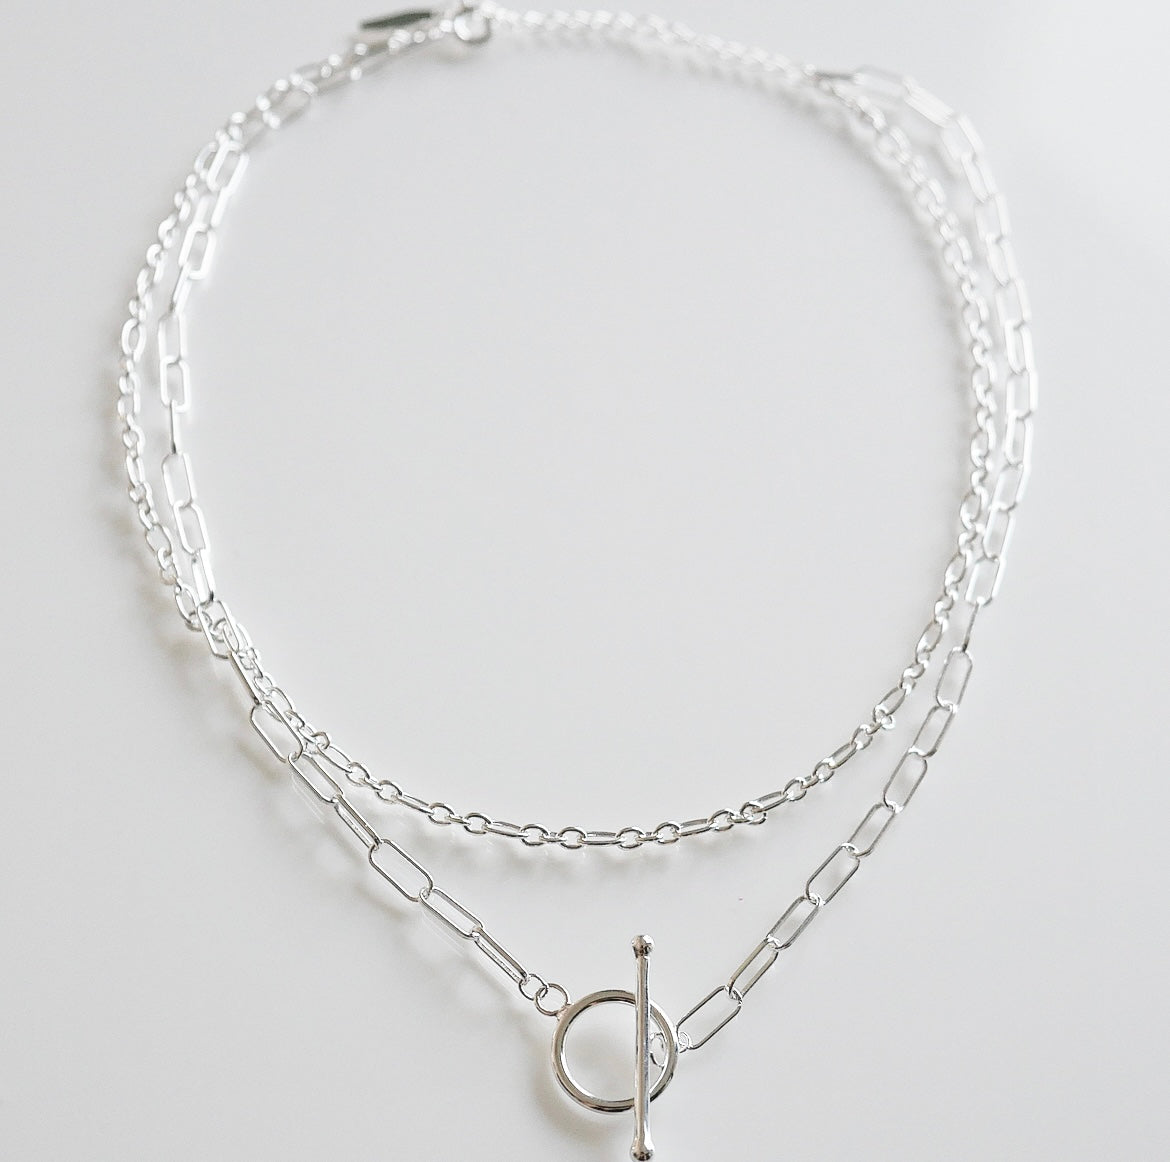 necklace, silver necklaces, white gold necklaces, jewelry, statement jewelry, fashion jewelry, 16 inch necklaces, short necklaces, choker necklace, layered necklaces, birthday gifts, anniversary gifts, fashion jewelry, fine jewelry, affordable jewelry, layering necklace ideas, kesley jewelry, trending on tiktok, white gold necklaces, double necklaces, silver necklace